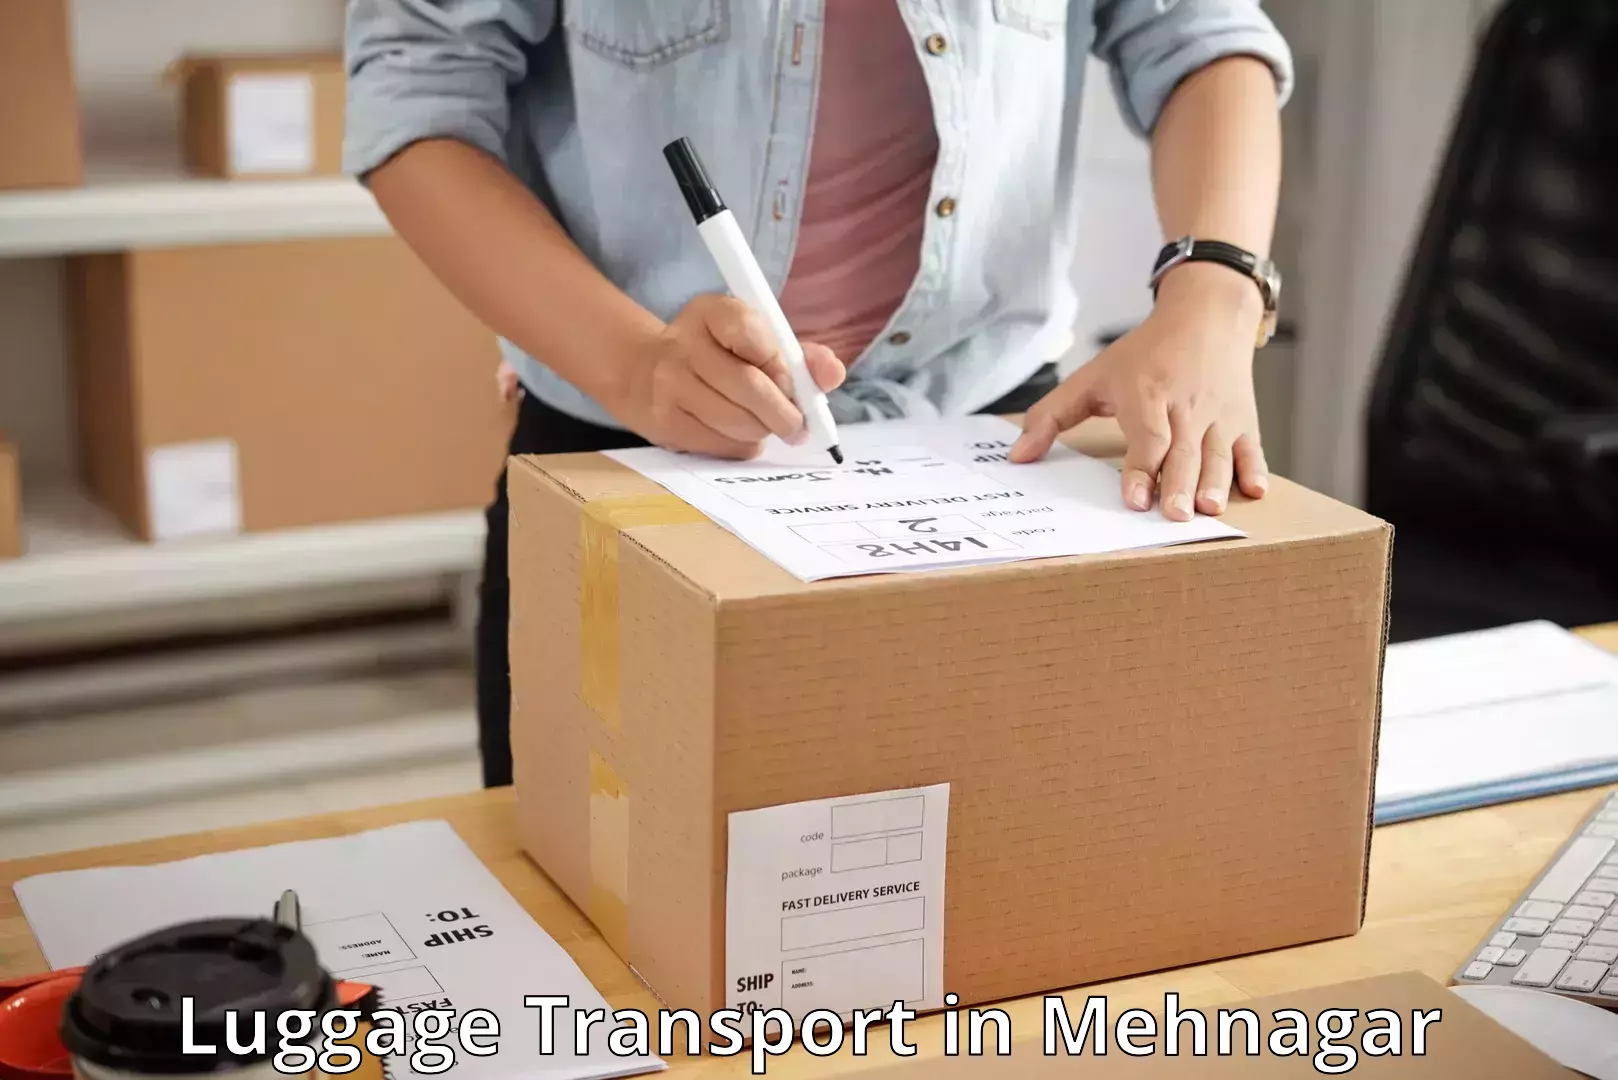 Hassle-free luggage shipping in Mehnagar